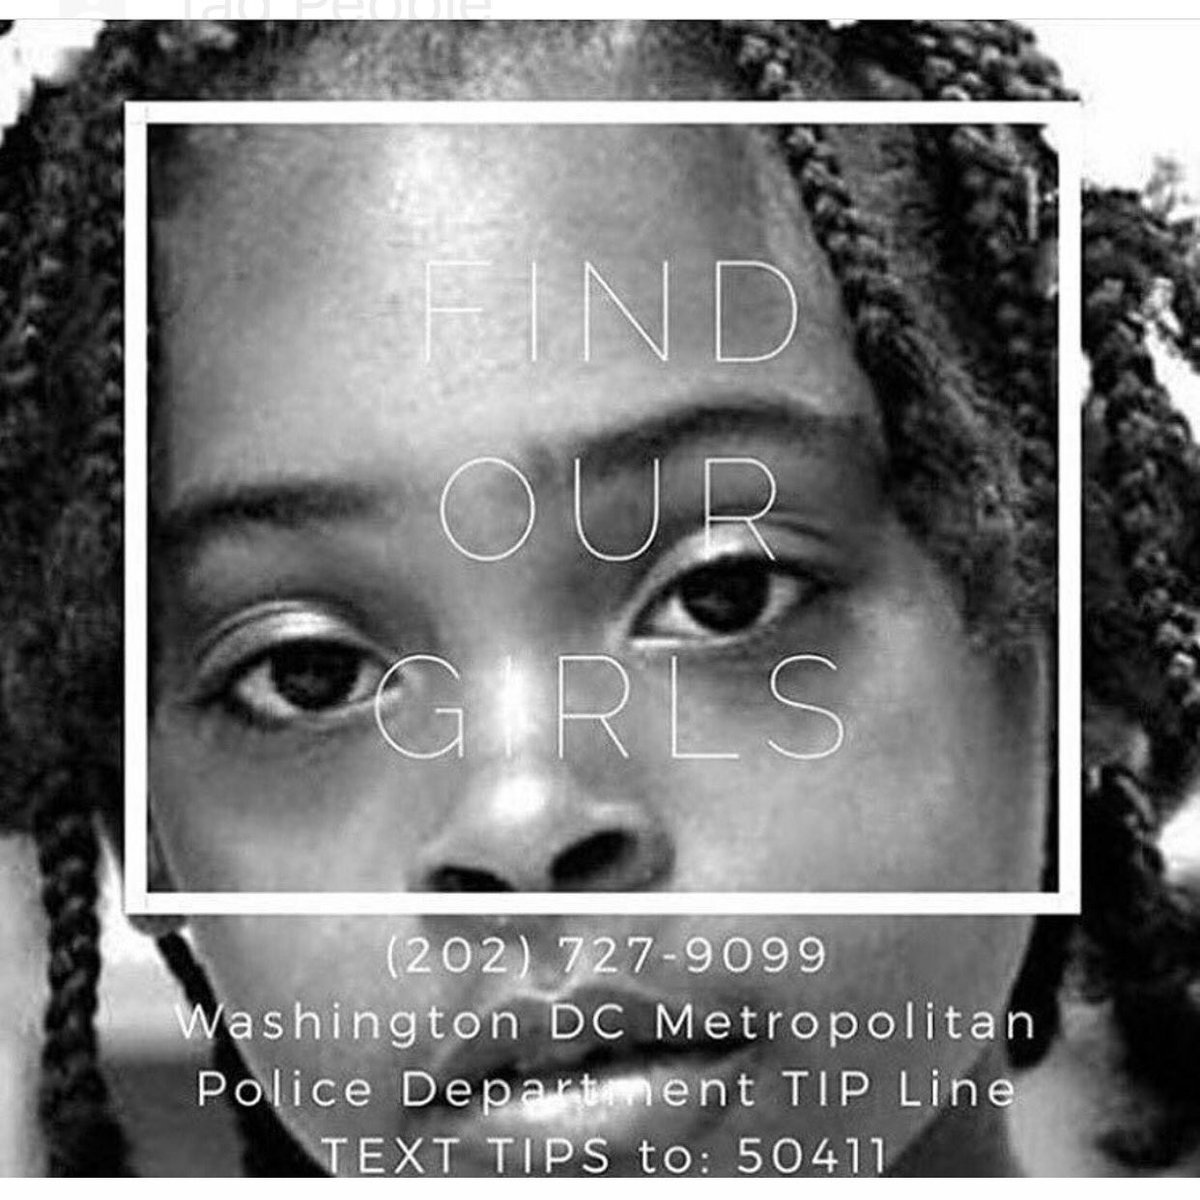 RT @ajanaomi_king: What is going on??? 
#findourgirls #neverstopsearching https://t.co/sU5X6PVPia